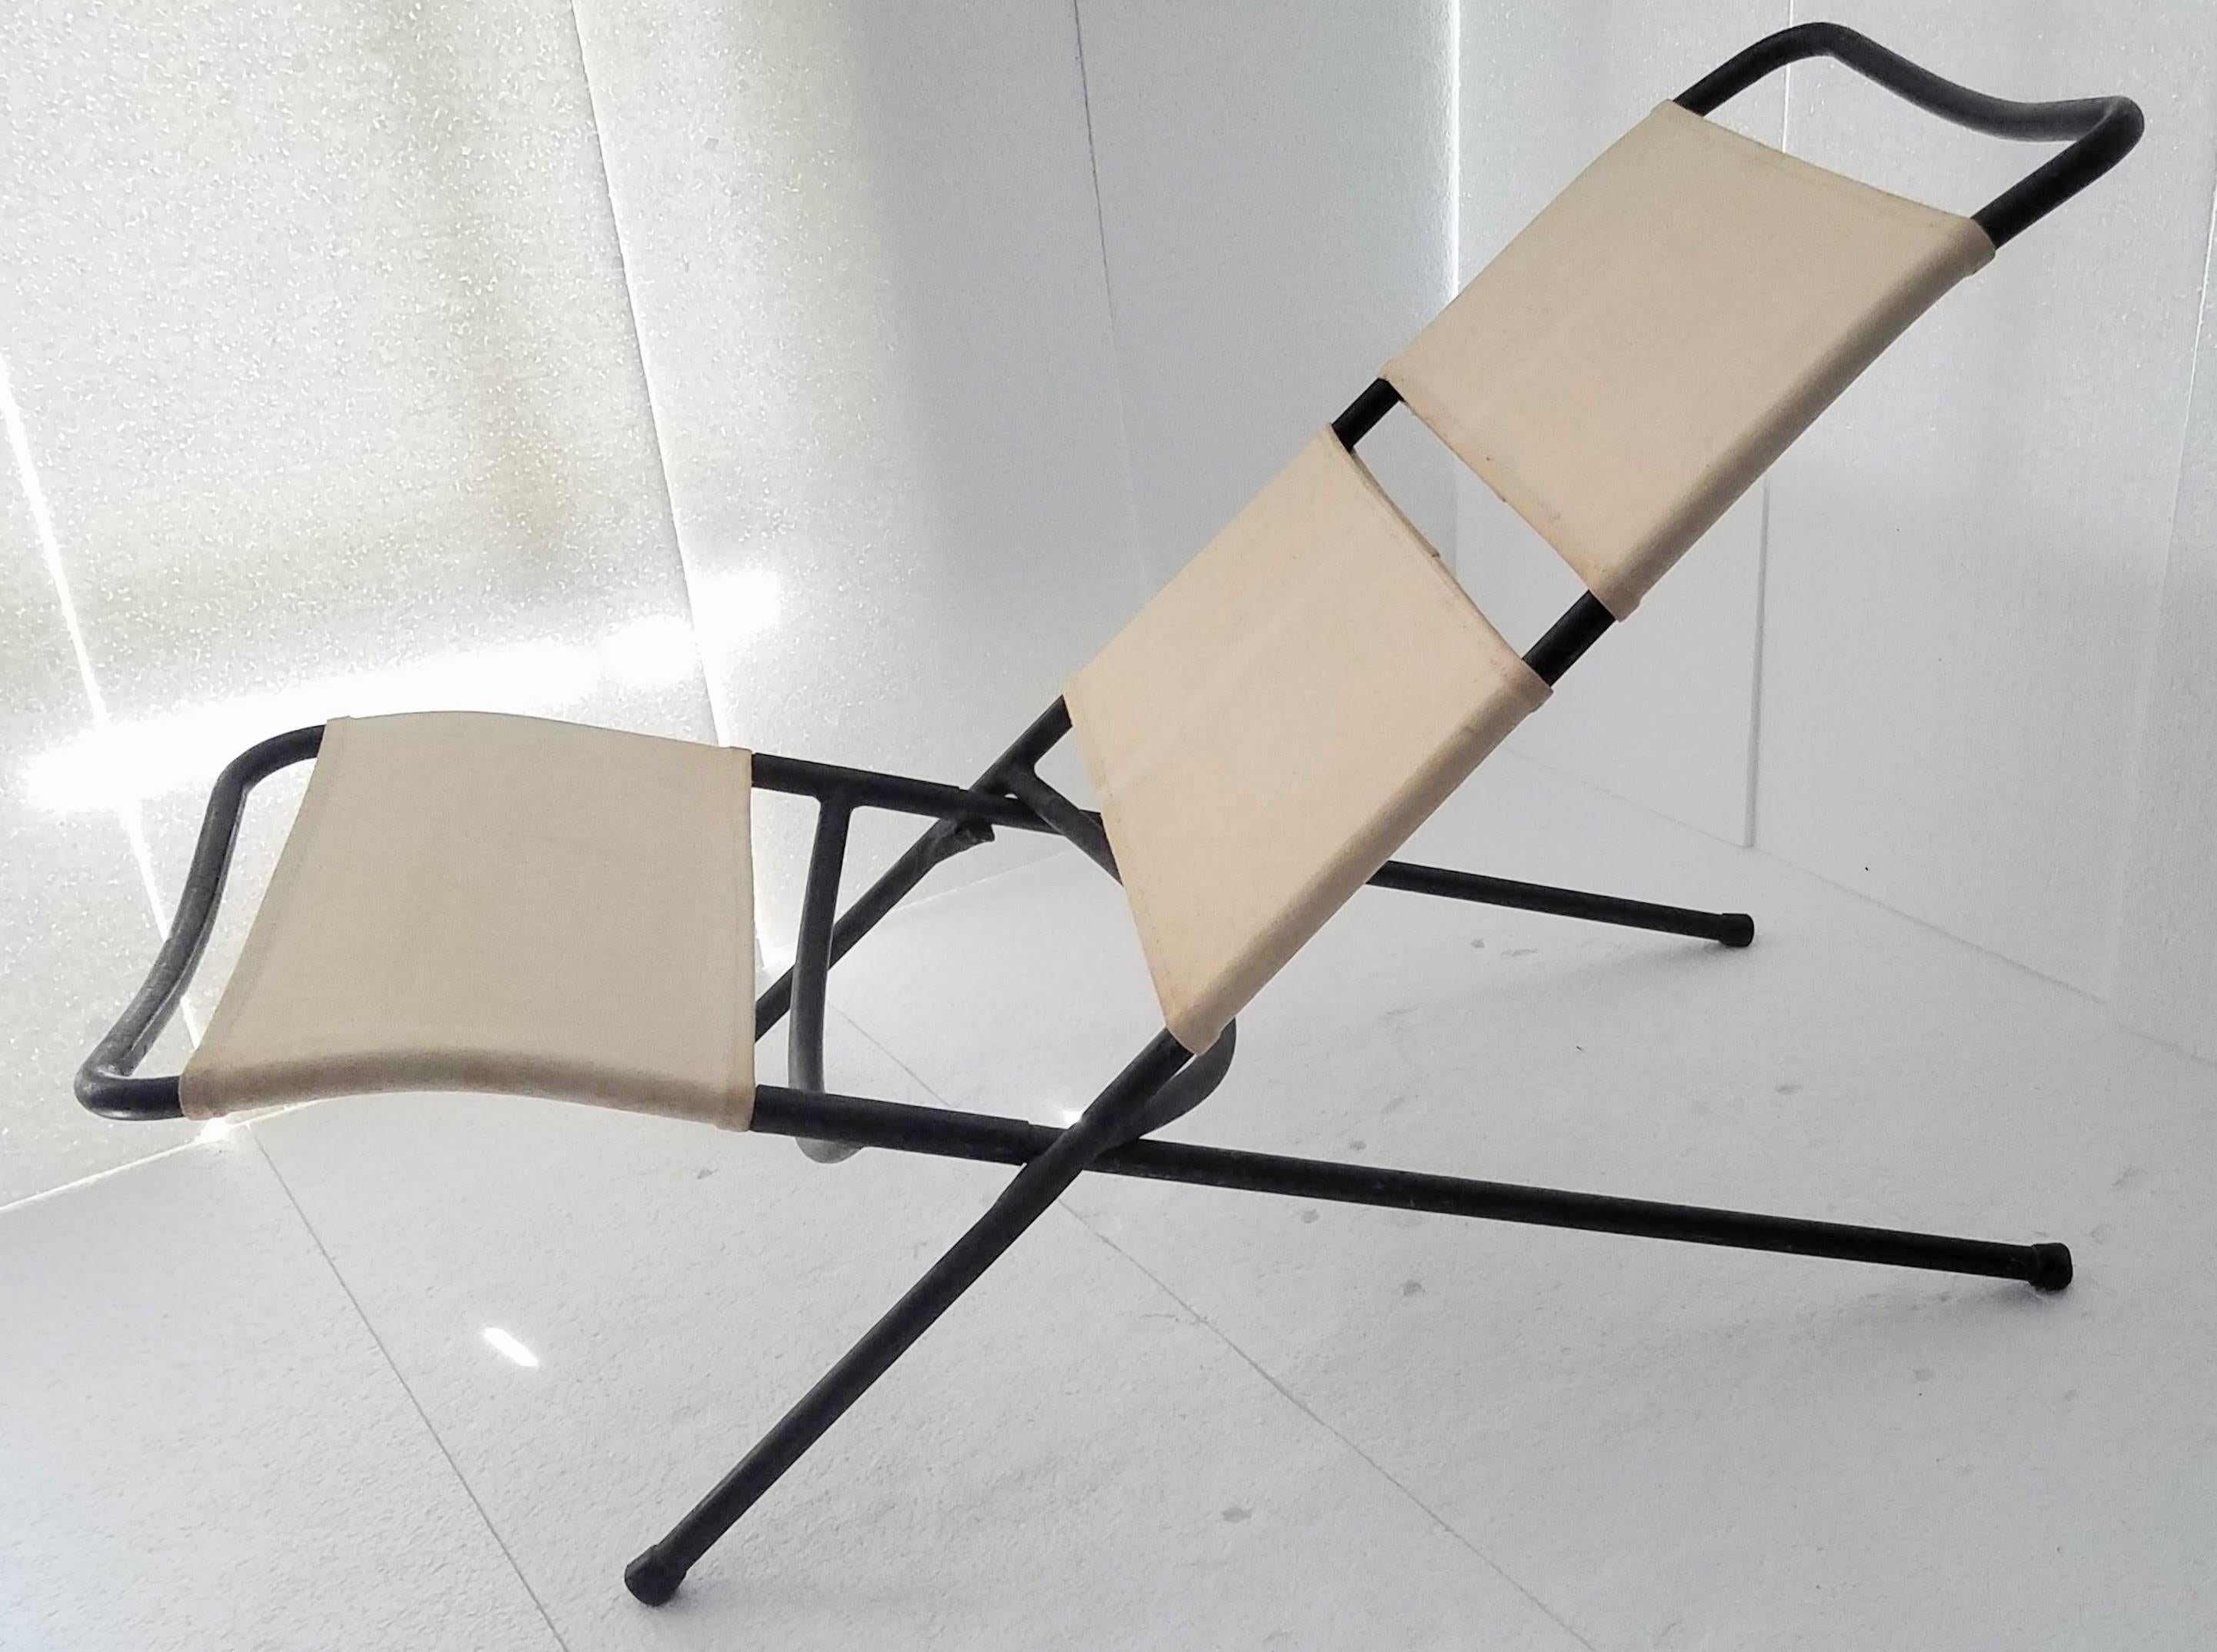 Congo folding chair designed by Ilmari Tapiovaara in 1954 manufactured by Lukkiseppo Ltd. in Finland.
This prototype of the Congo chair comes from the estate of Ilmari Tapiovaara.
Rare.
In very good condition.